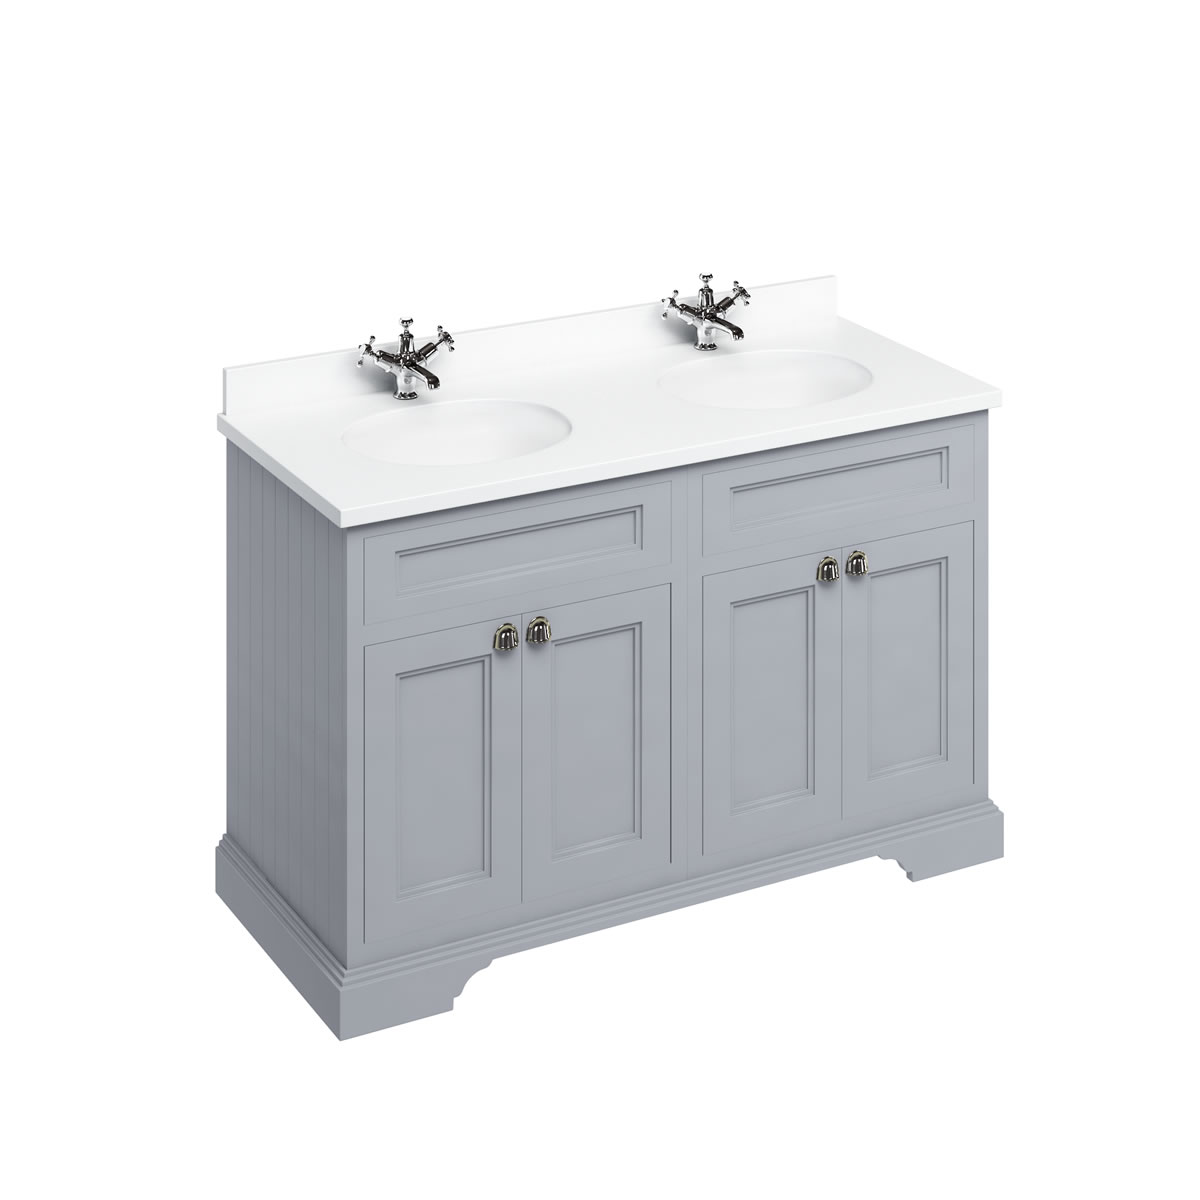 Freestanding 130 Vanity Unit with doors - Classic Grey and Minerva white worktop with two integrated white basins 